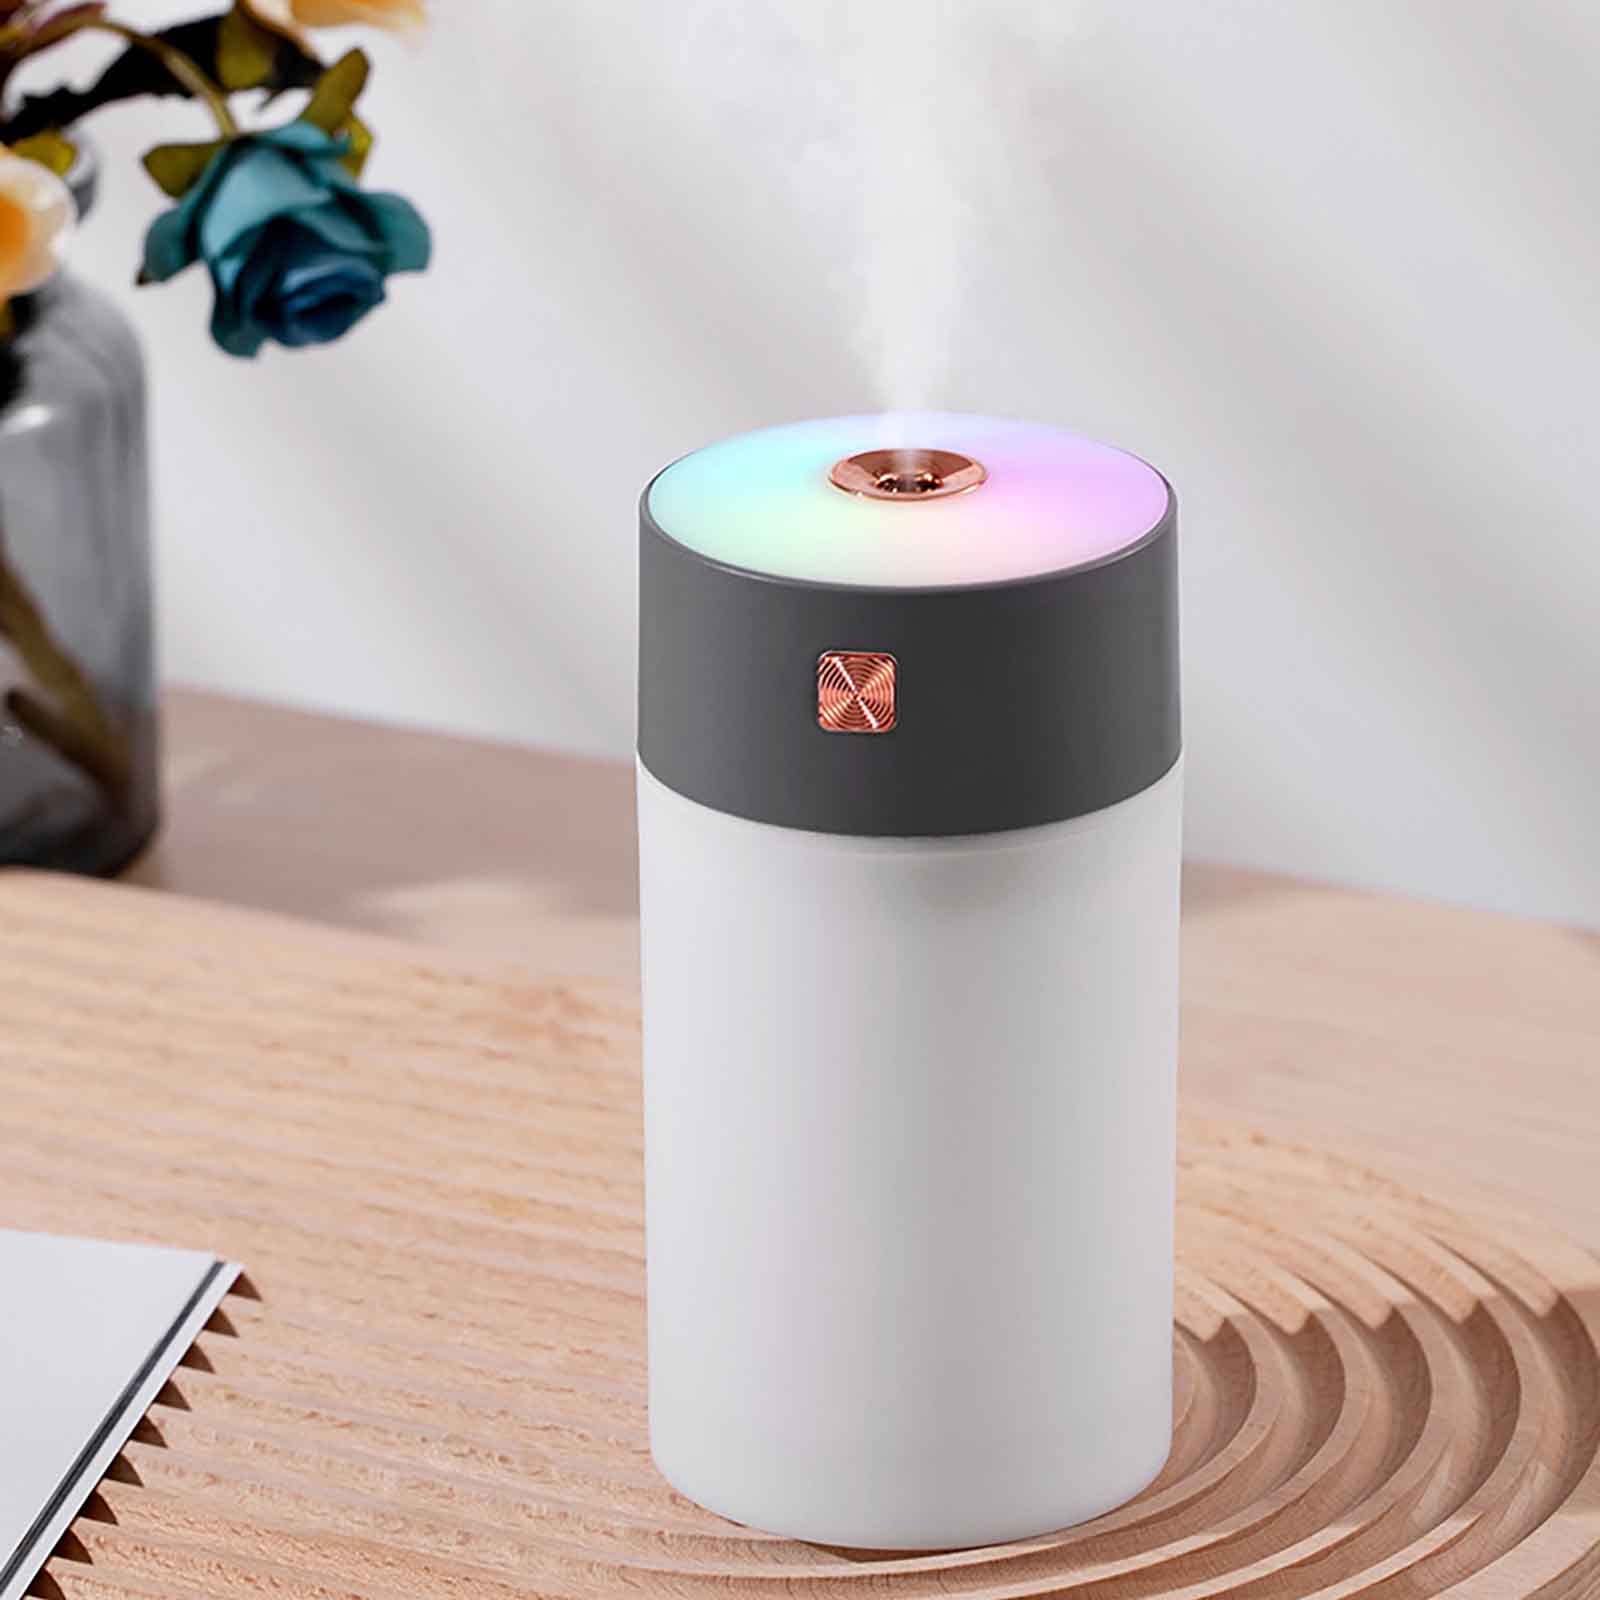 VIO 300ML Rainbow Cup Car Humidifier USB Mini Mist Gift Aromatherapy, Portable Air Humidifier Cold Mist Humidifier Suitable for Cars Offices Indoors Bedrooms (Grey)